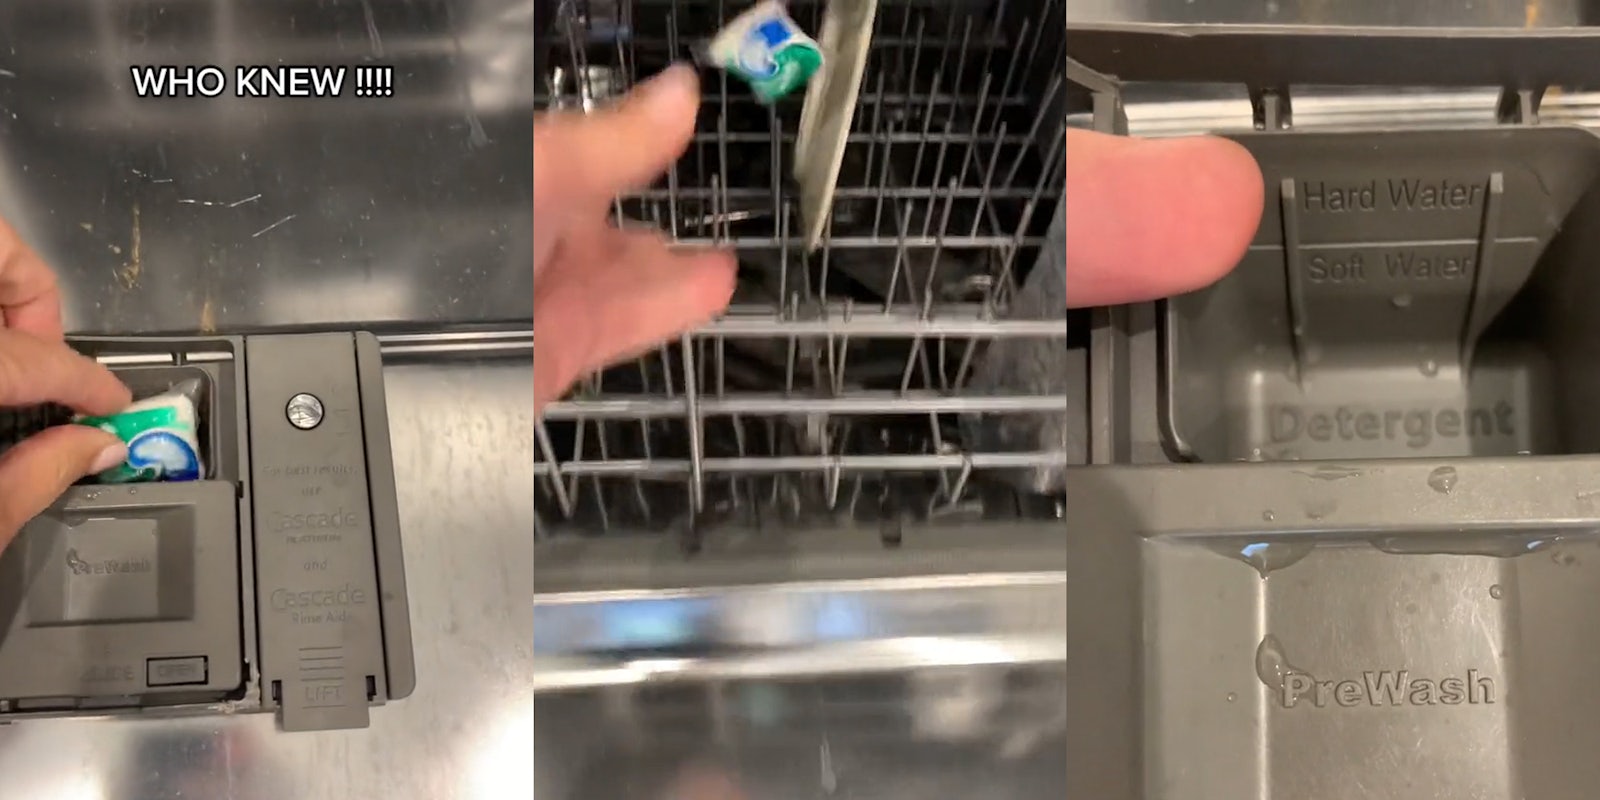 hand loading detergent pod into dishwasher detergent compartment with caption 'WHO KNEW!!!!' (l) hand throwing detergent pod into dishwasher (c) finger pointing to detergent compartment of dishwasher (r)